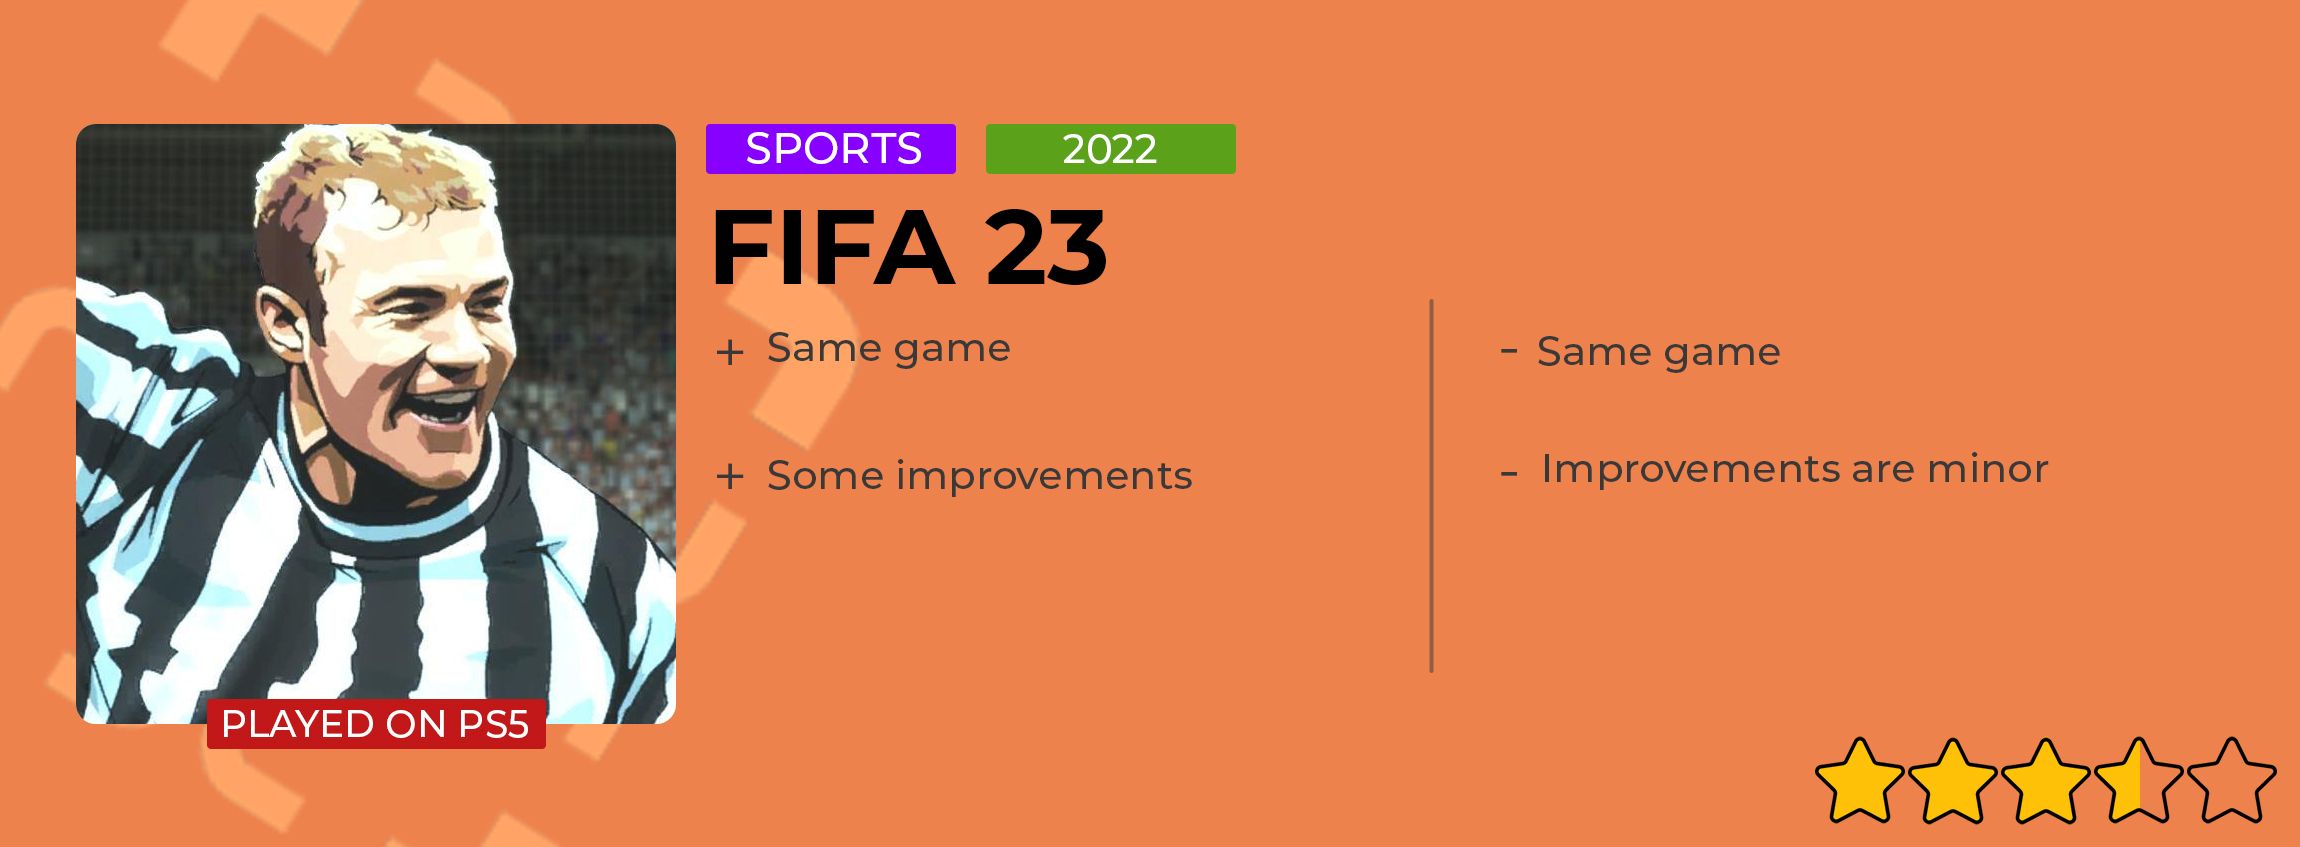 Fifa 23 Review card (2)